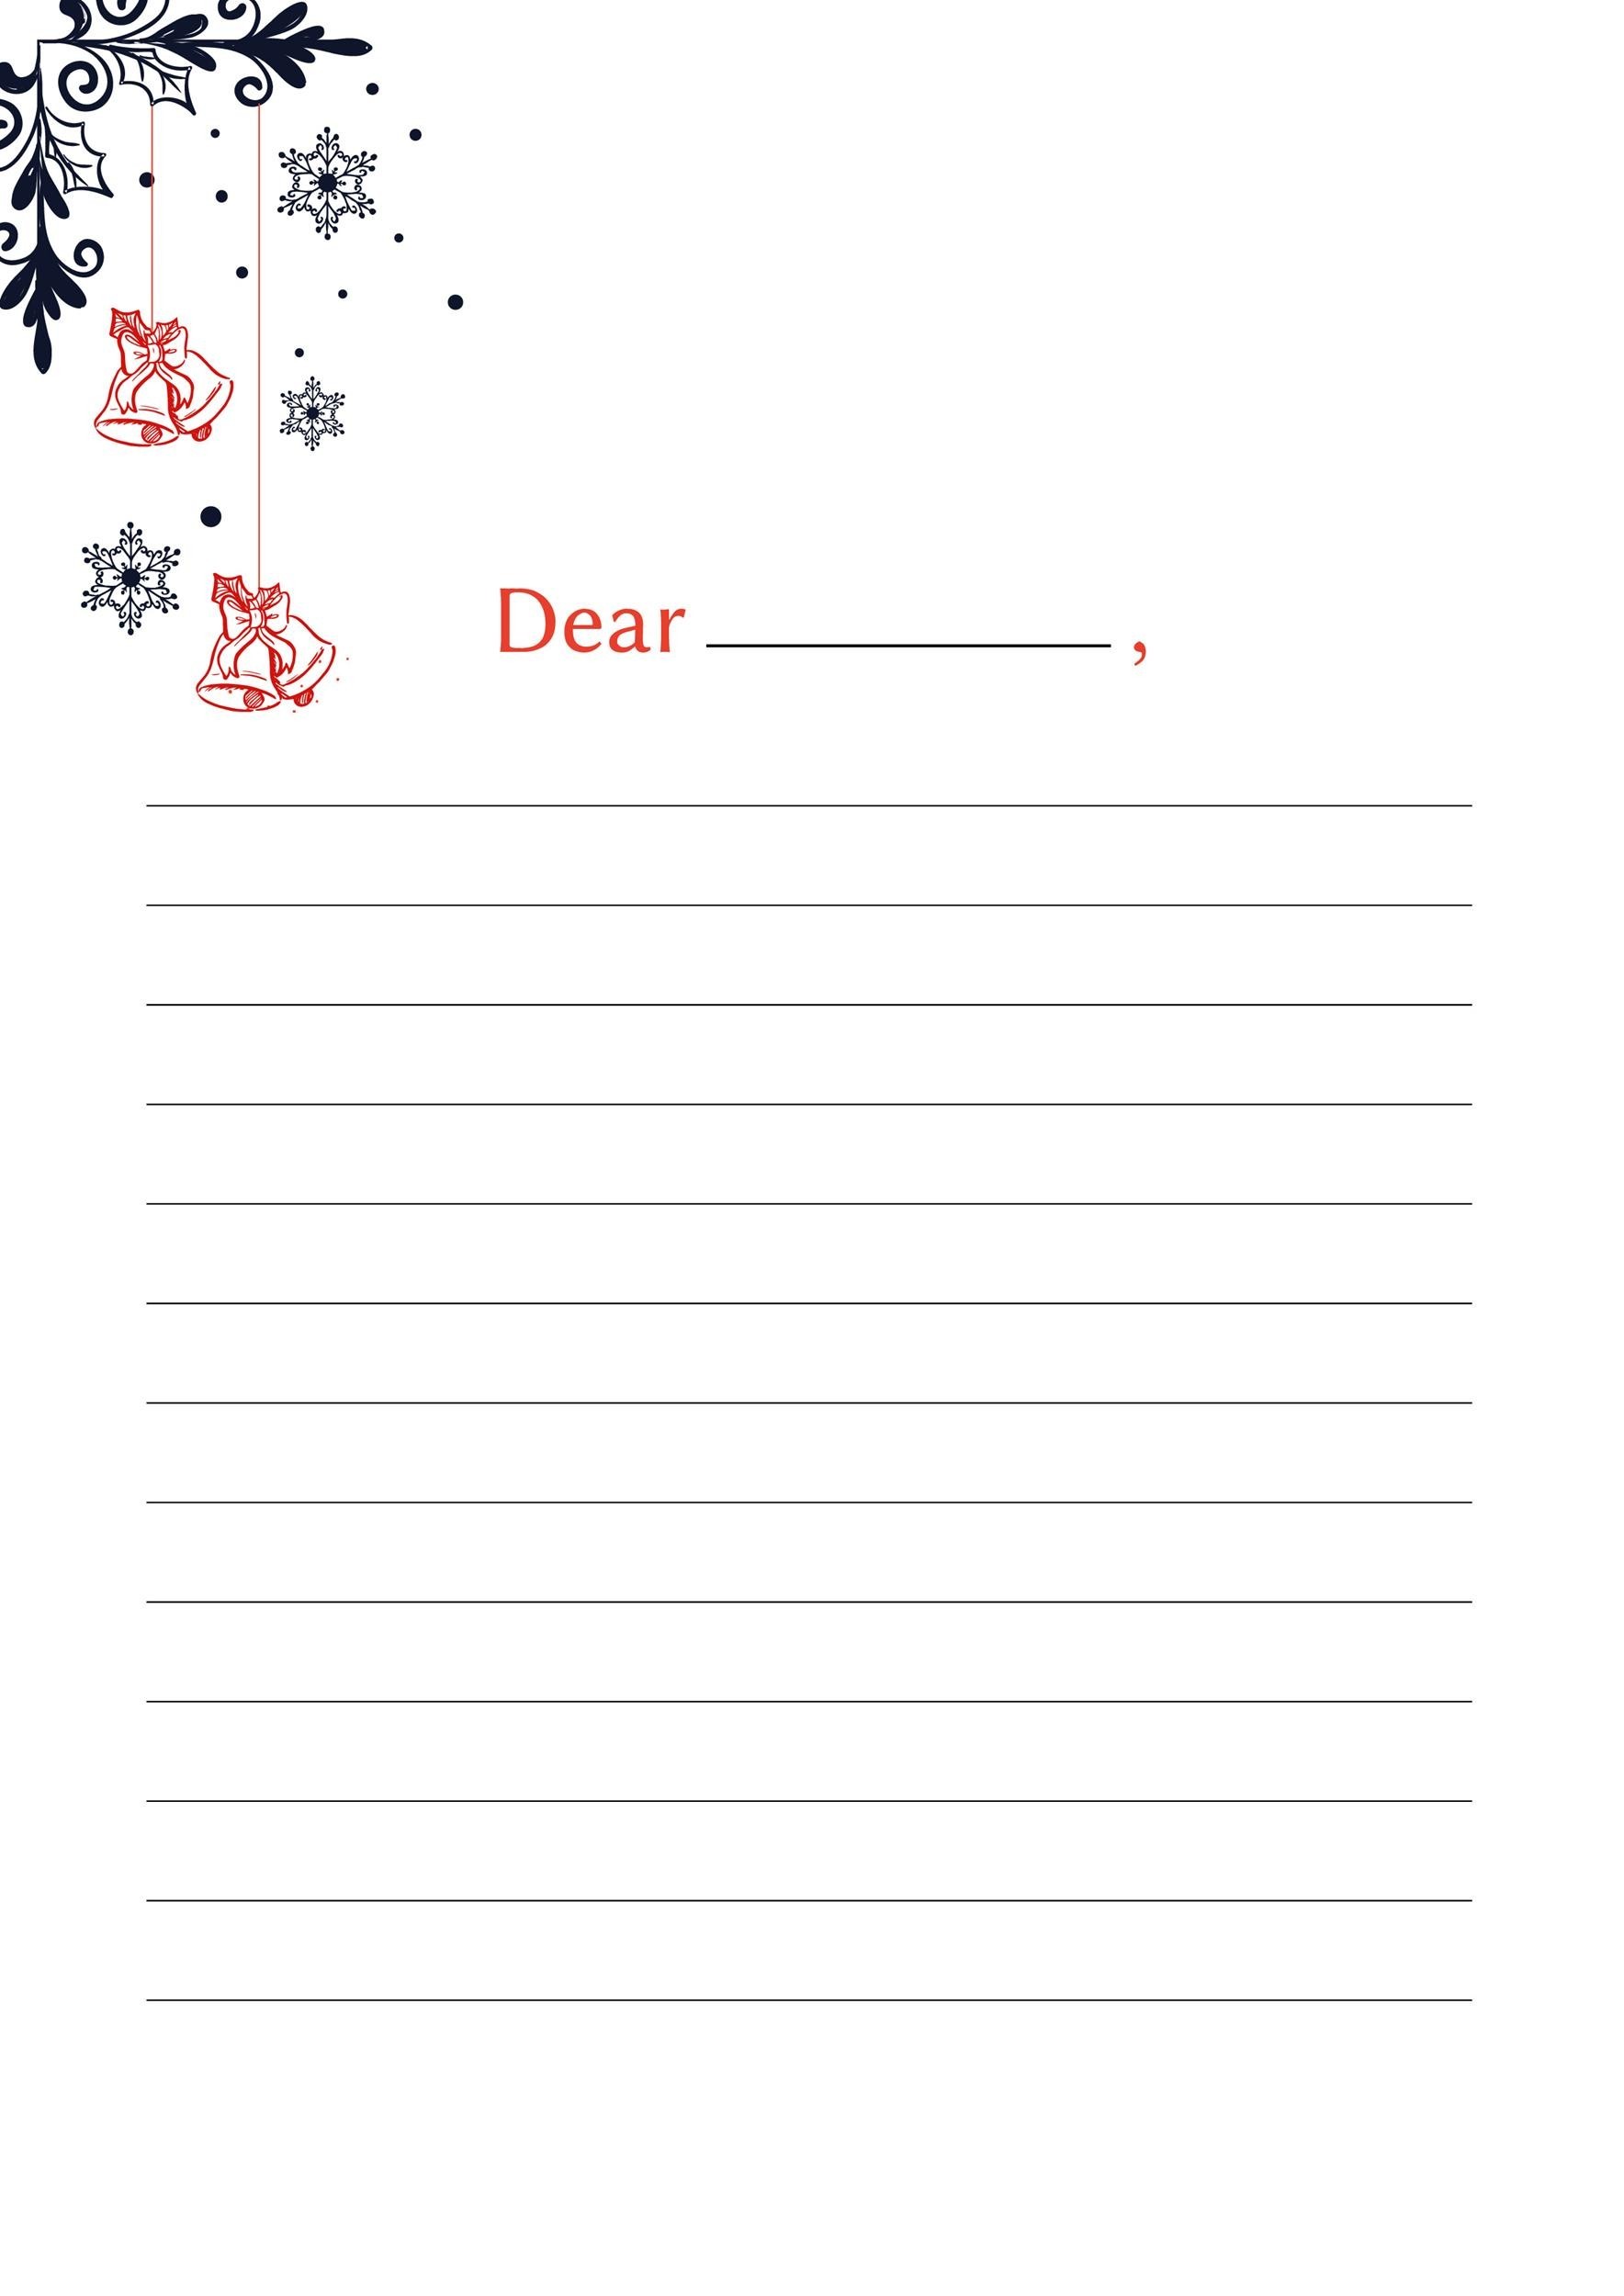 32 Printable Lined Paper Templates ᐅ TemplateLab